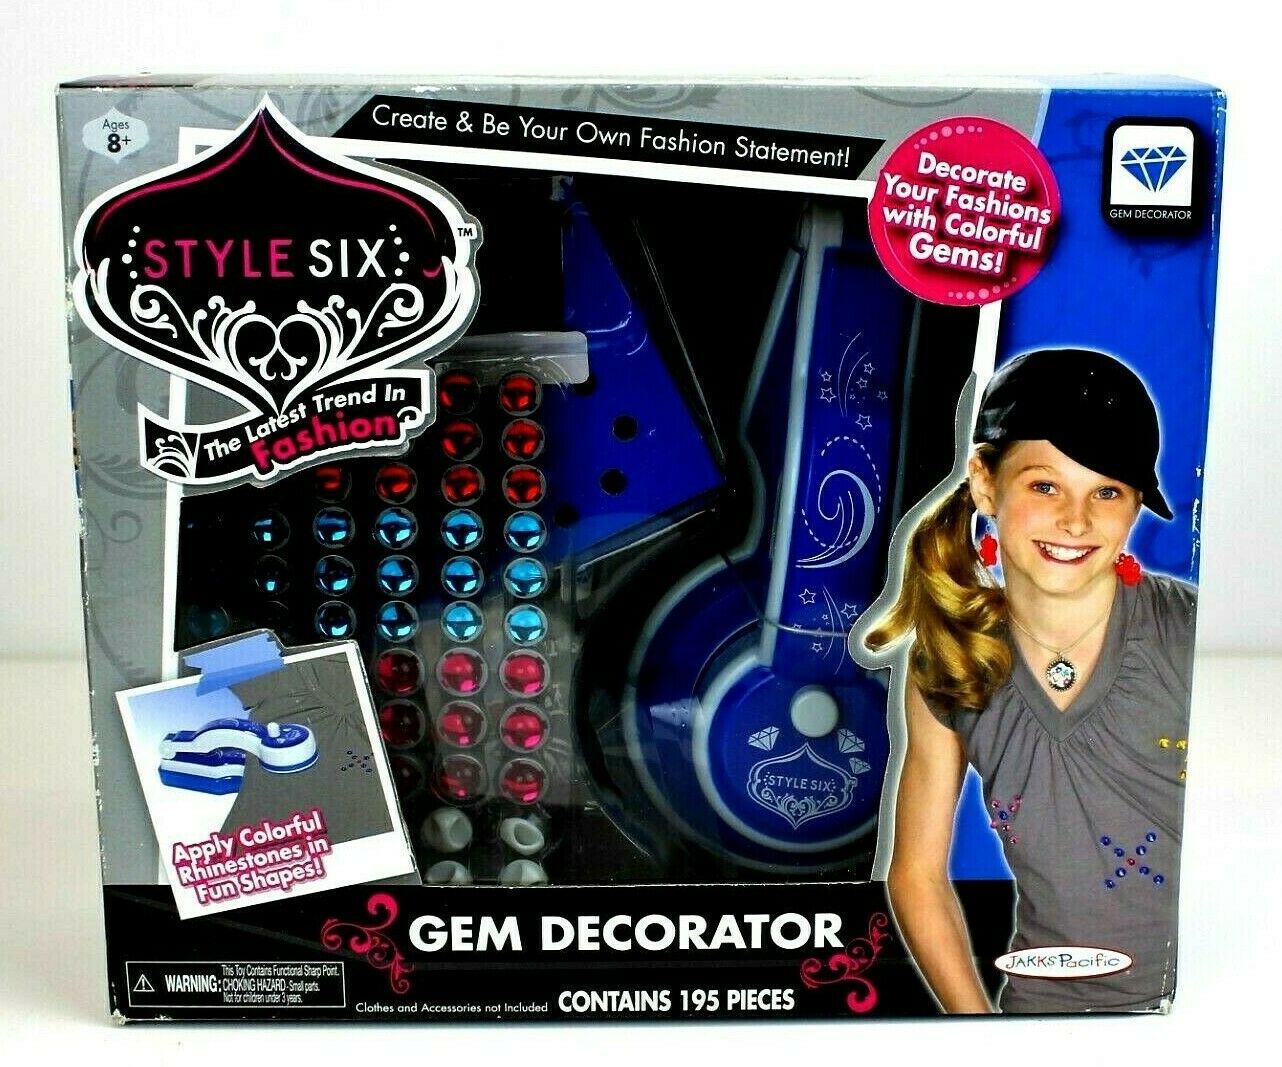 Style Six Gem Decorator 195 Pieces, Decorate Your Fashions with Gems Rhinestone